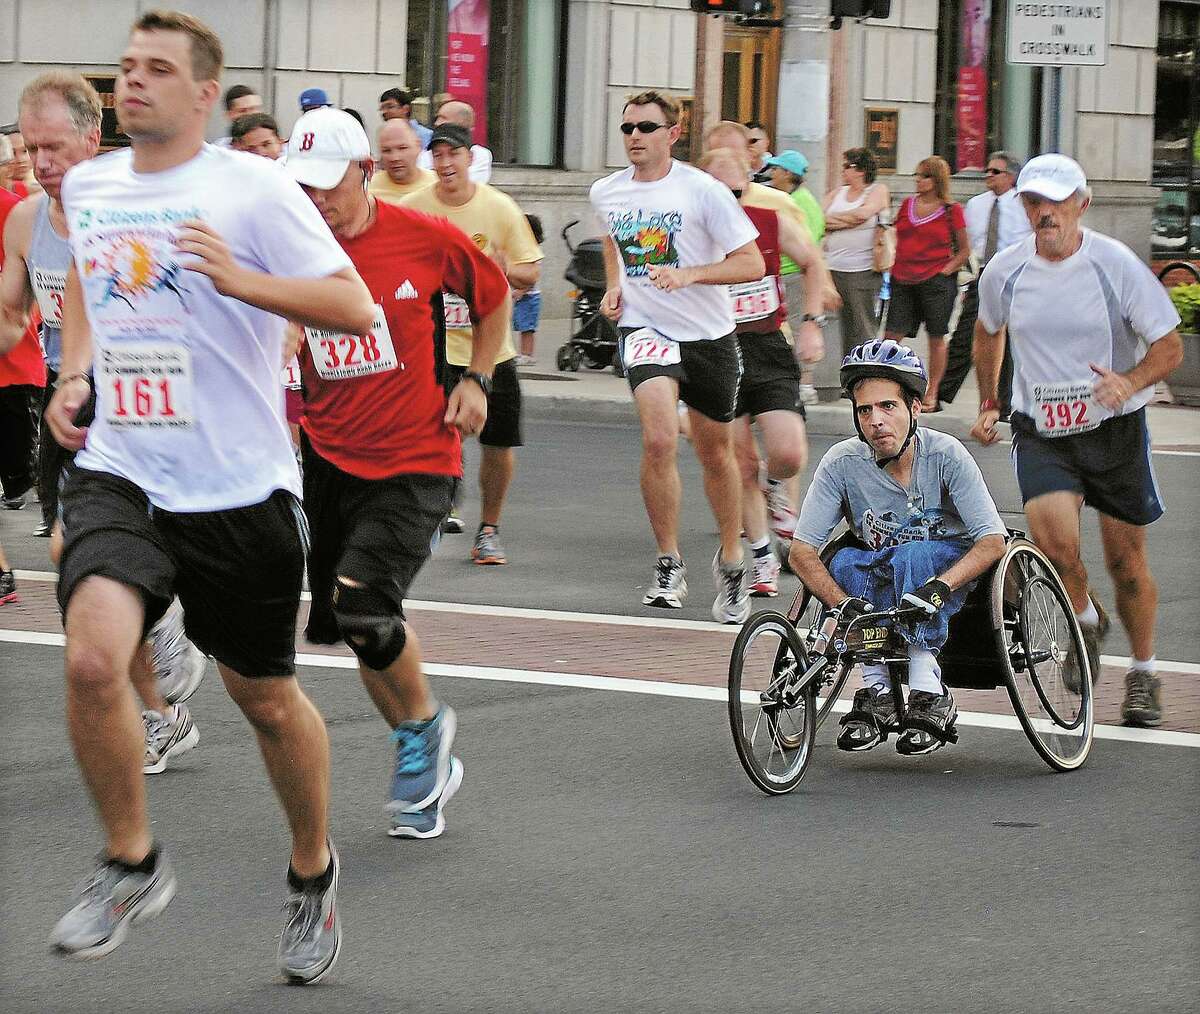 Runners compete in the 2011 Citizens Bank 5K Summer Fun Run on Main Street in Middletown.